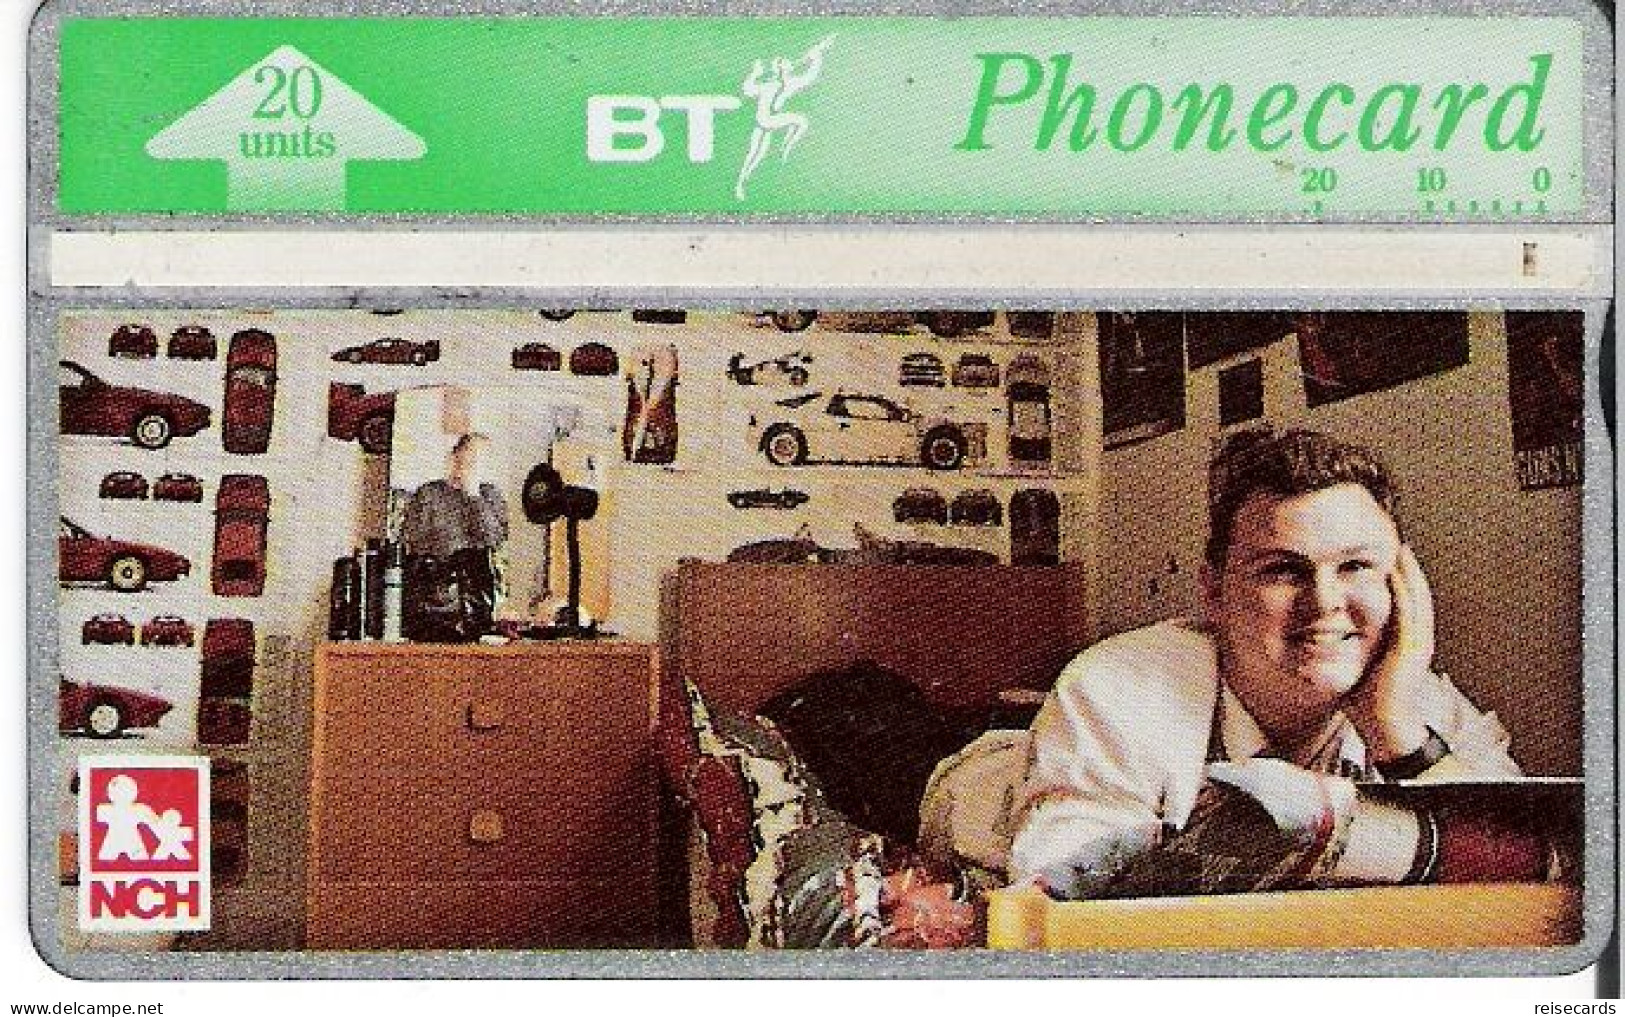 Great Britain: British Telecom - 230H BT AndNational Children's Home - BT Advertising Issues